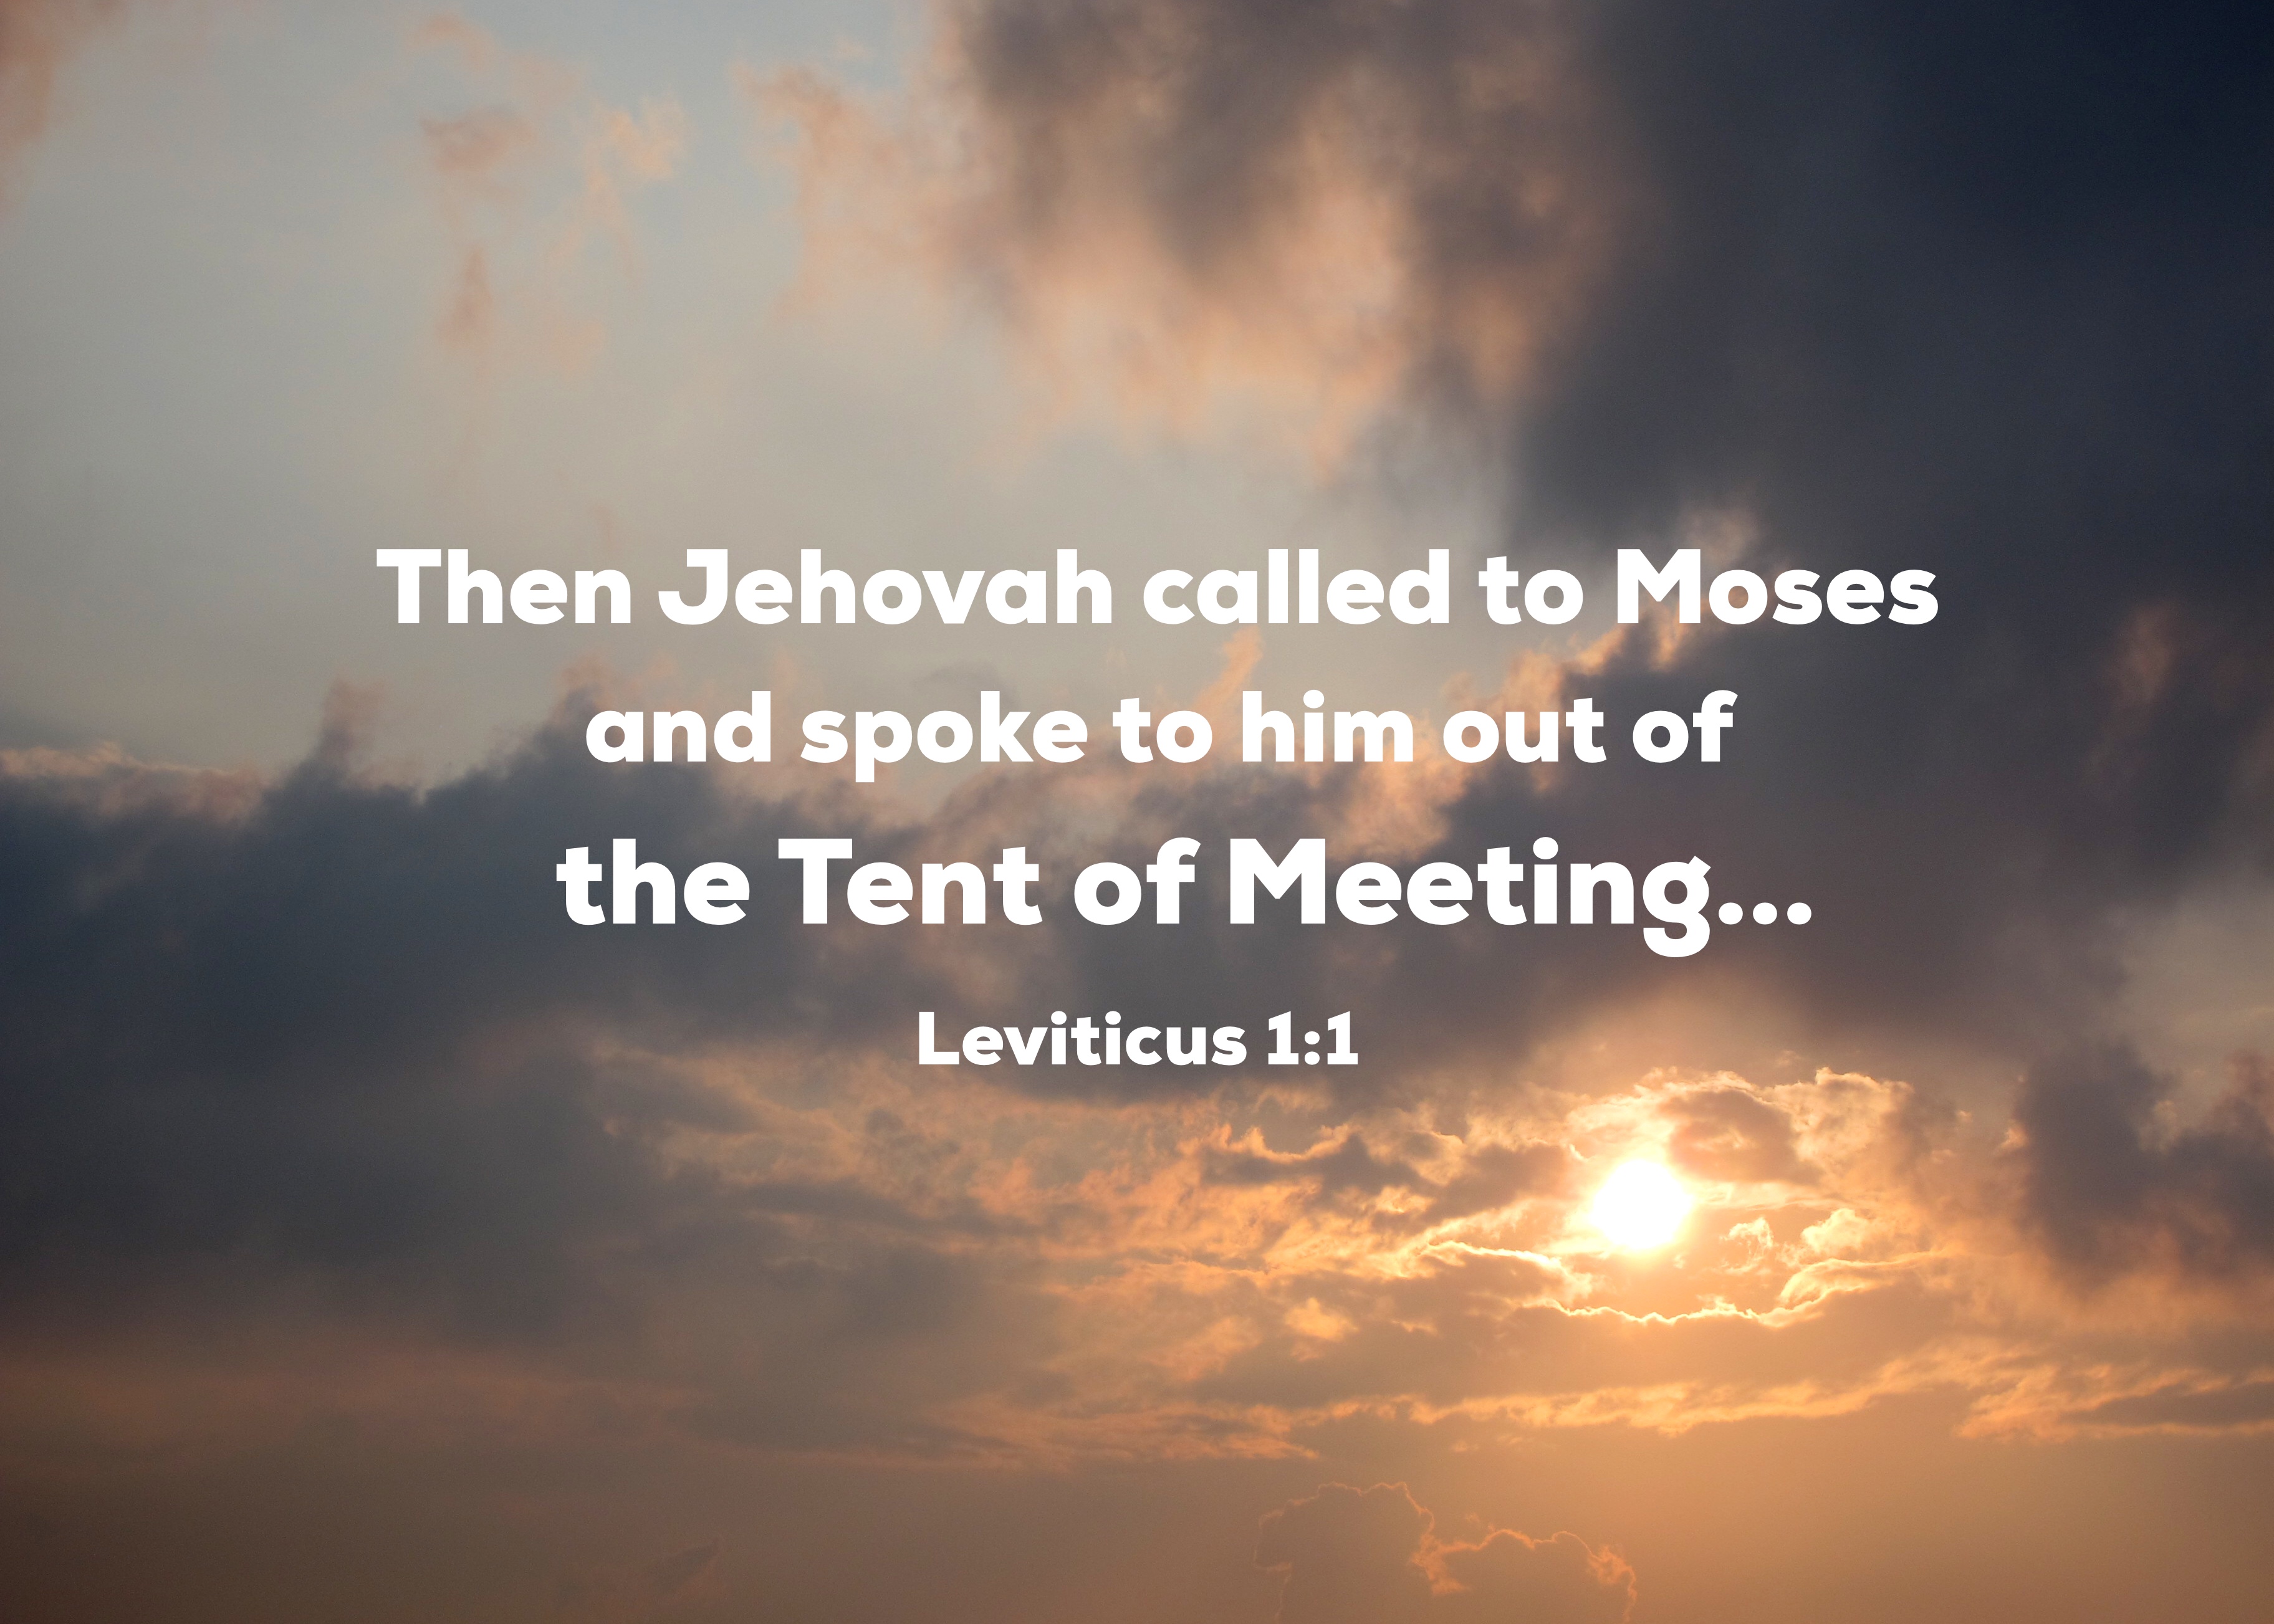 Leviticus 1:1 Then Jehovah called to Moses and spoke to him out of the Tent of Meeting, saying